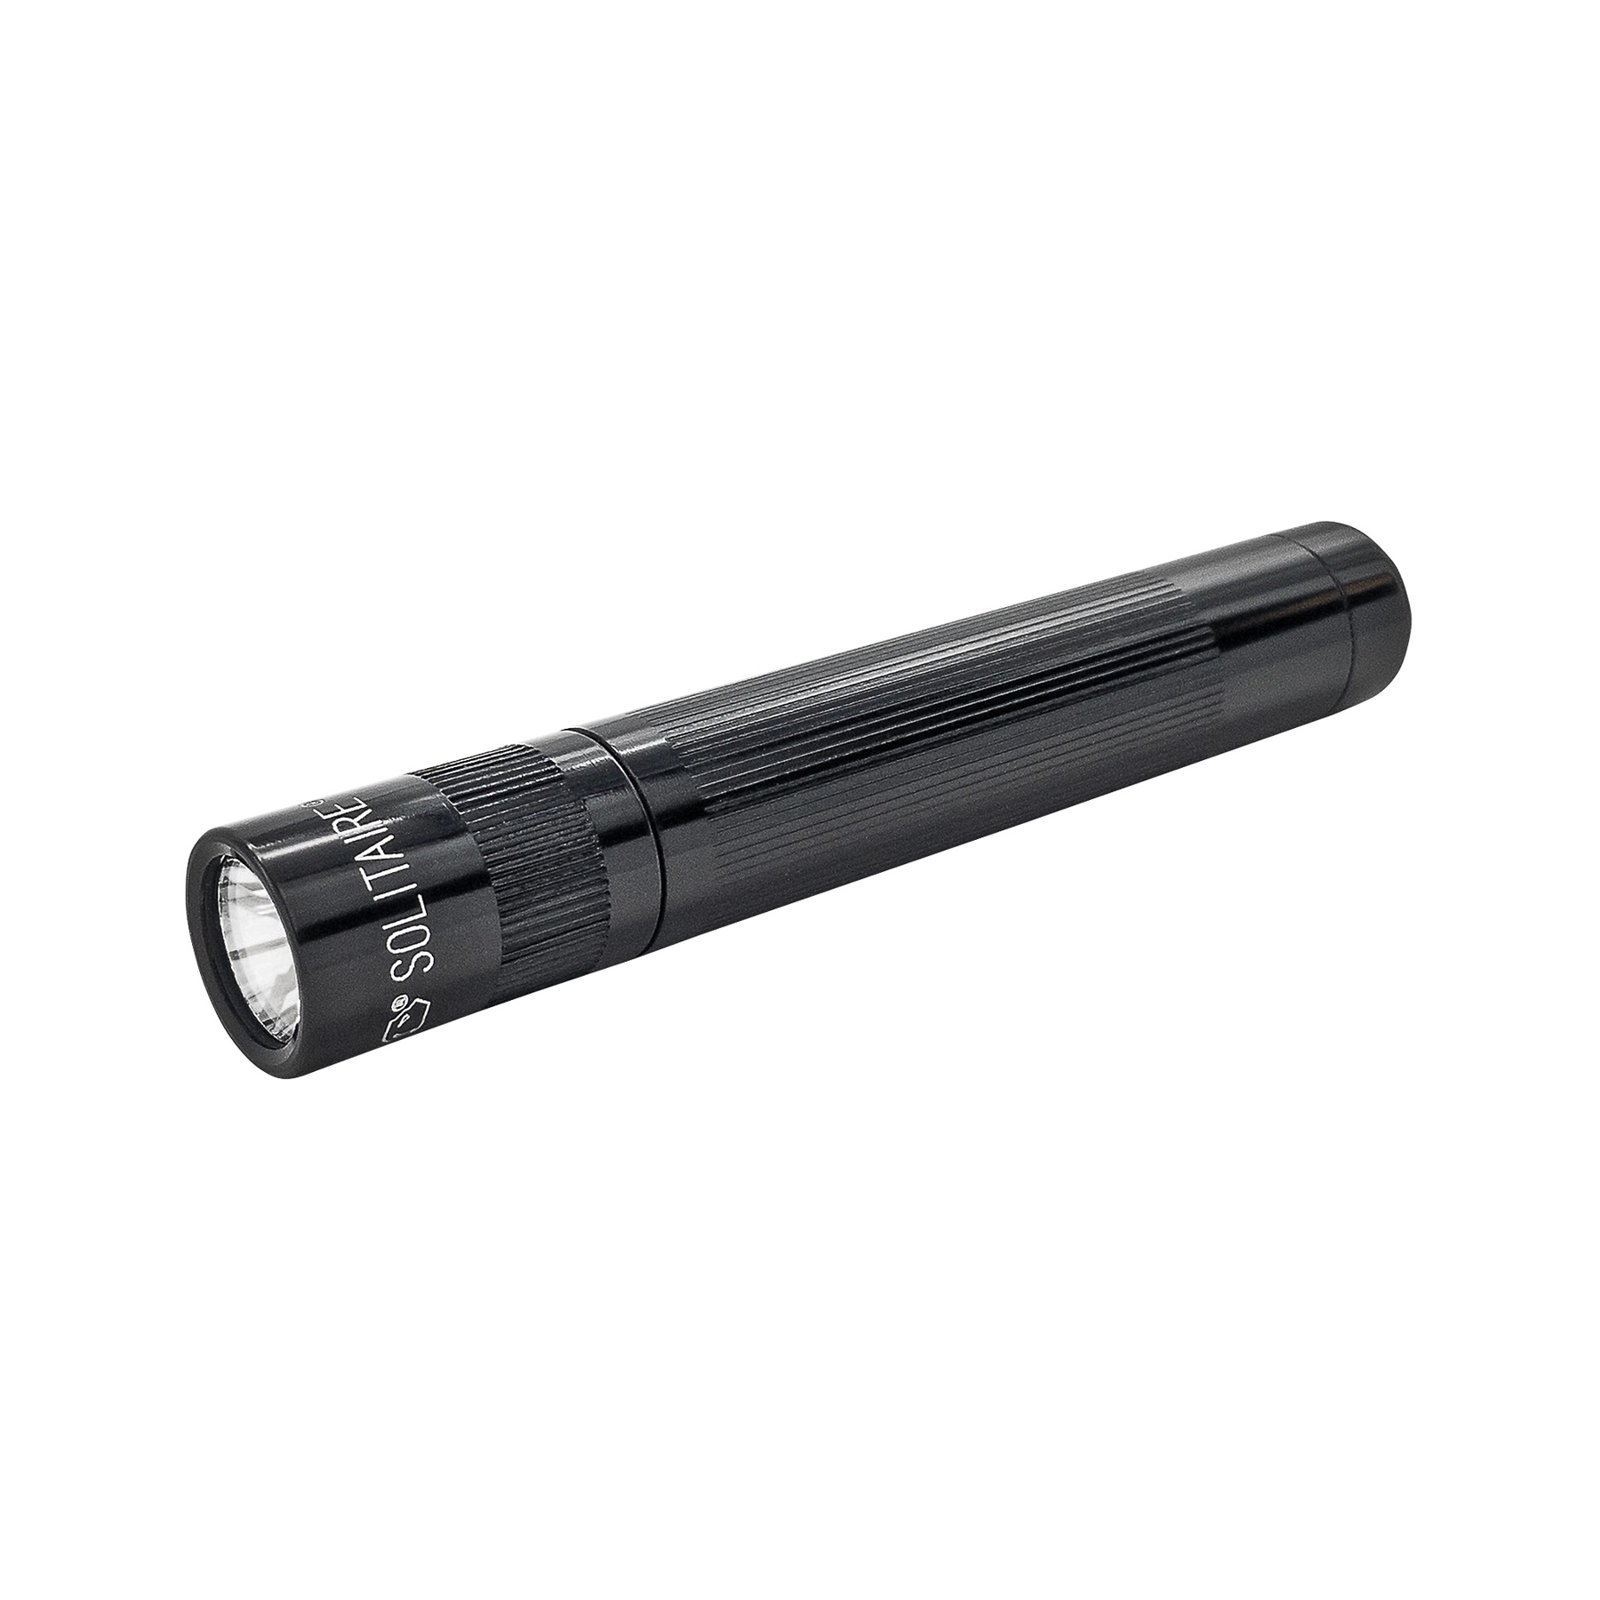 Maglite LED zaklamp Solitaire, 1 Cell AAA, zwart